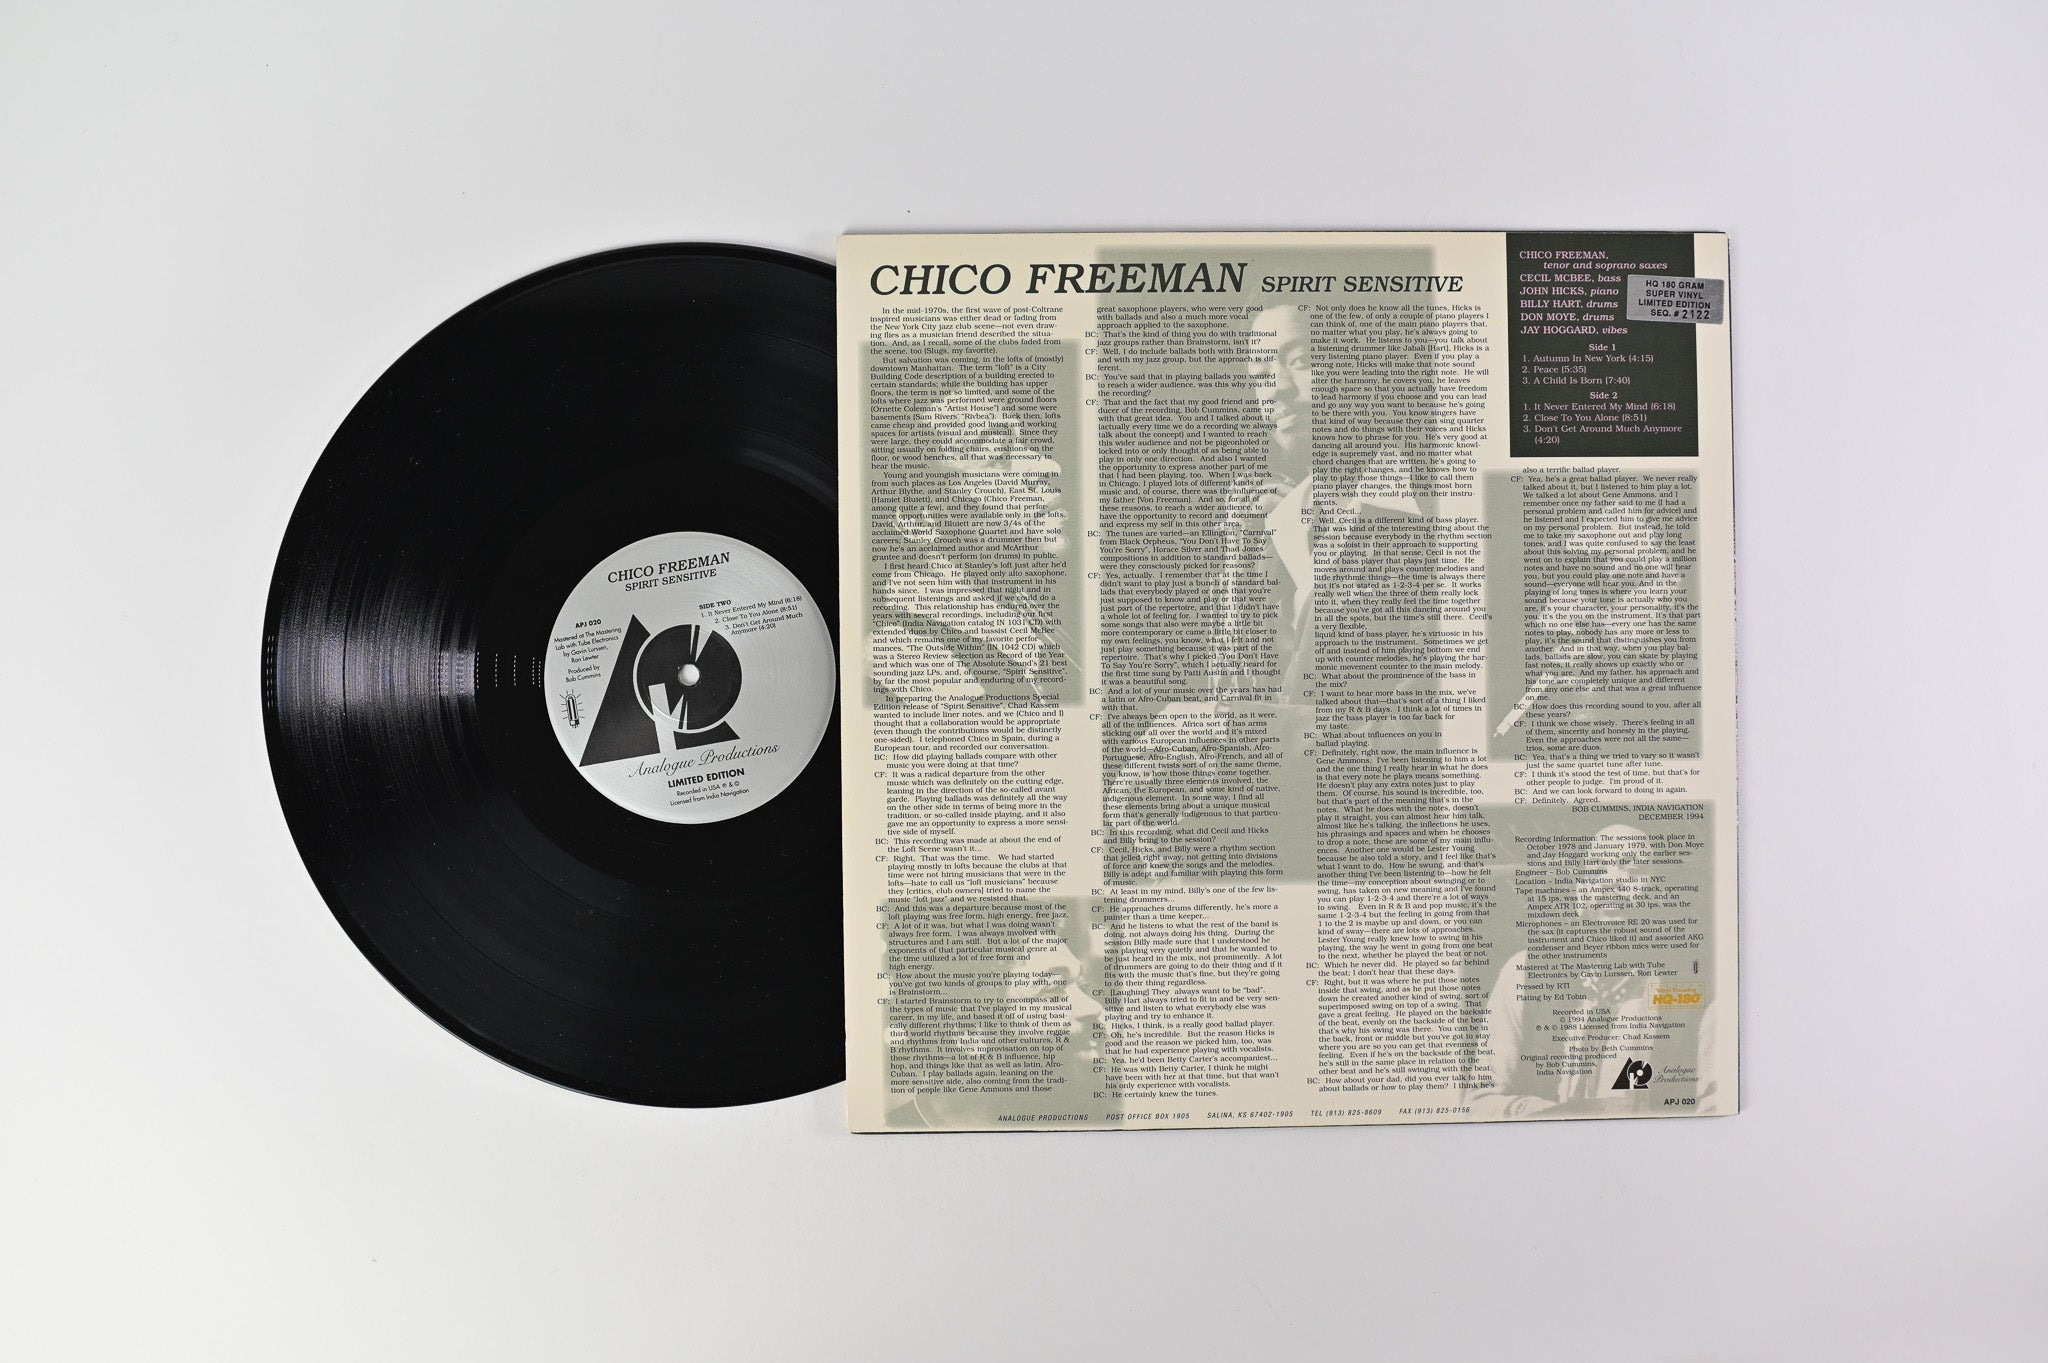 Chico Freeman - Spirit Sensitive Analogue Productions Limited Numbered Reissue